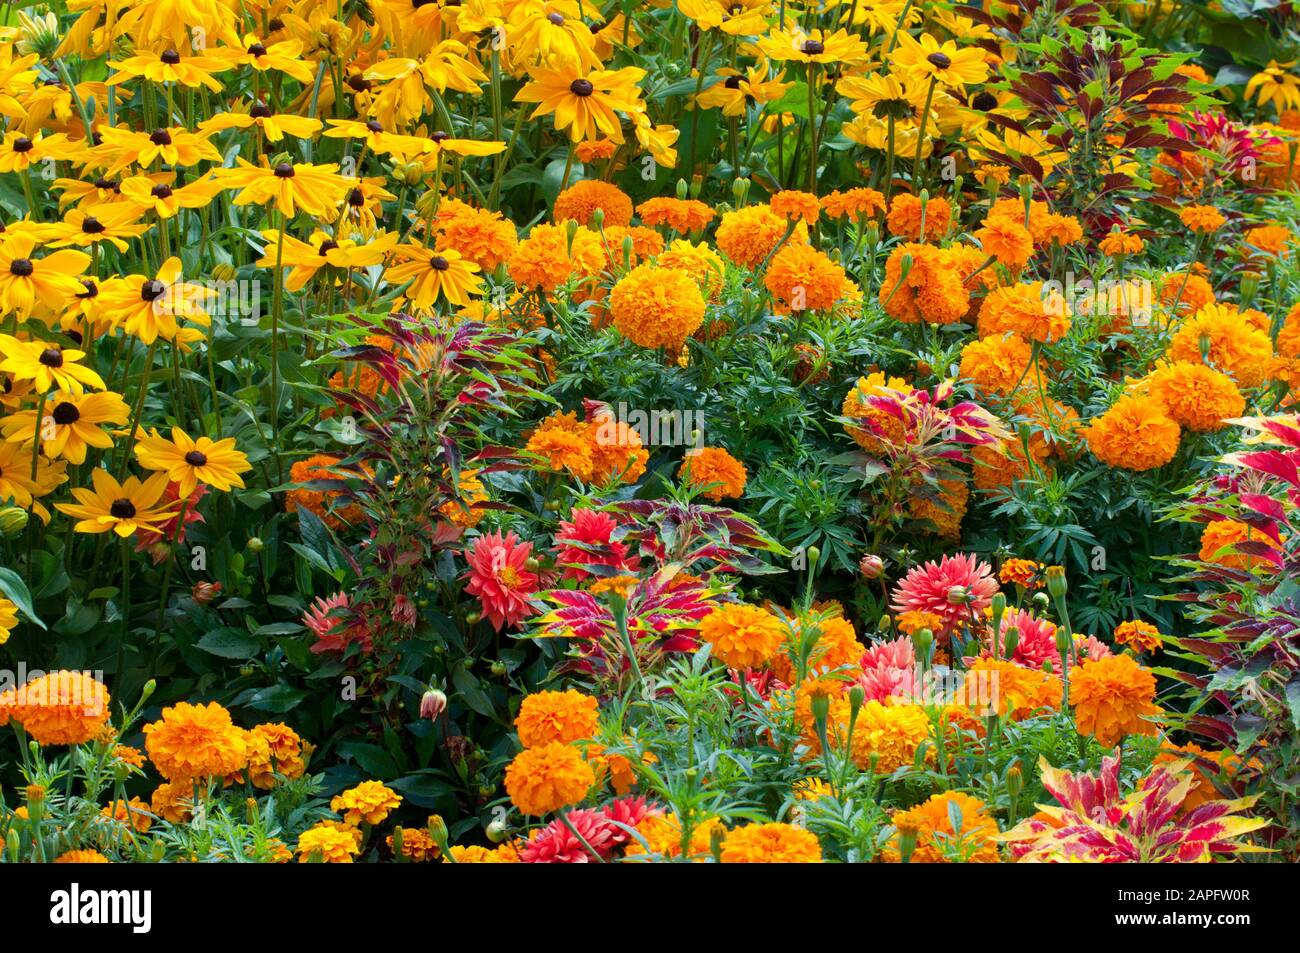 Association of Indian Rose or Mexican Marigold (Tagetes erecta) and Tampala (Amaranthus tricolor) in bloom Stock Photo